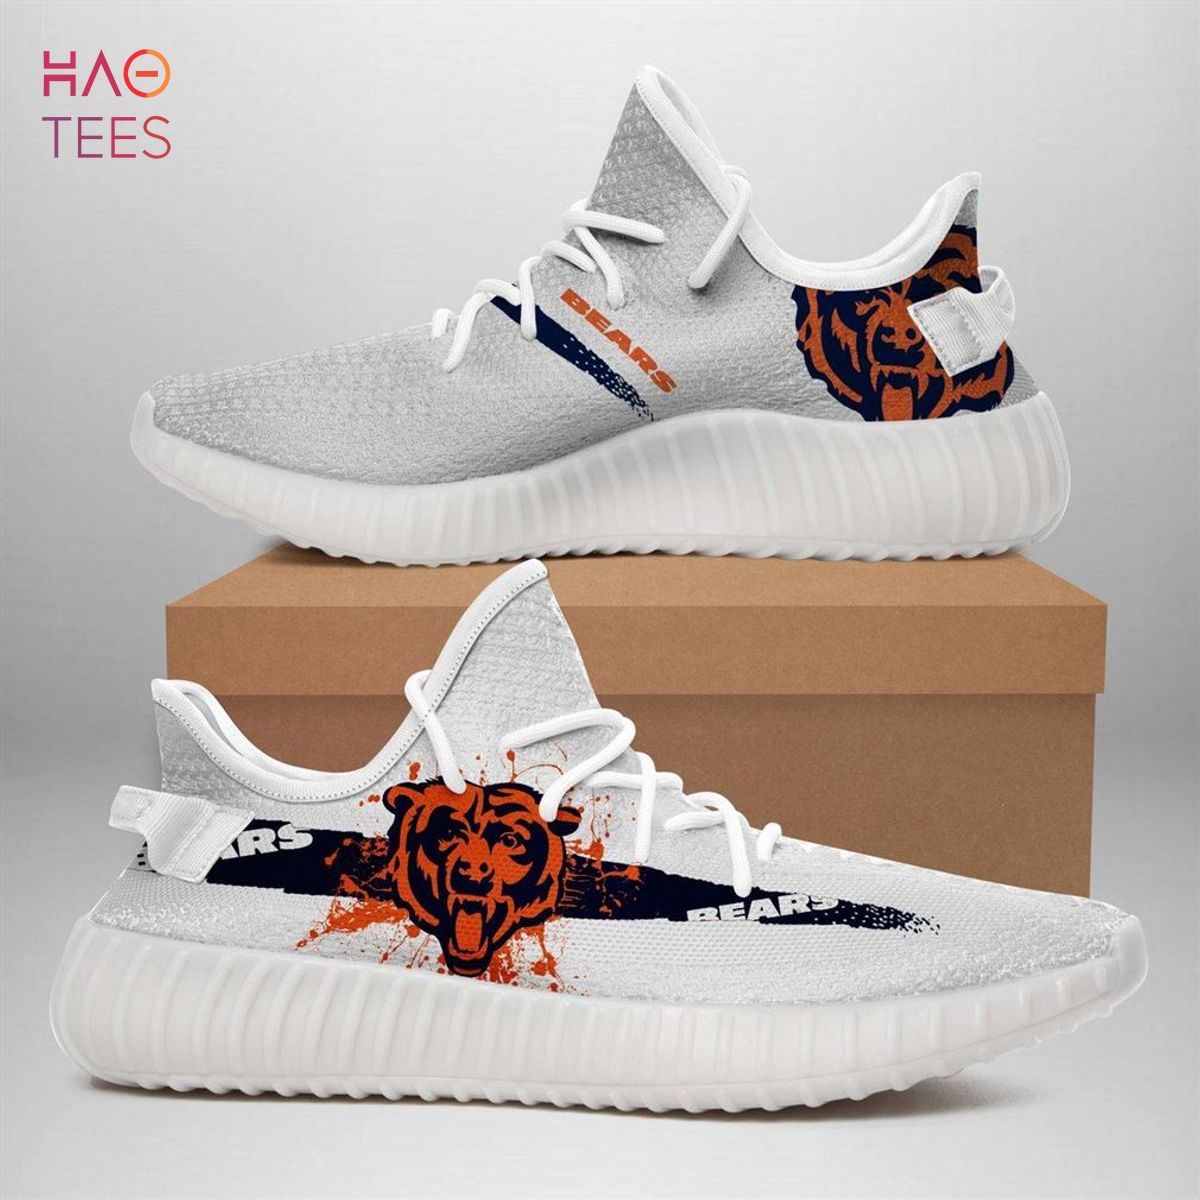 [TRENDDING] Chicago Bears Nfl Sport Teams Runing Yeezy Sneakers Shoes